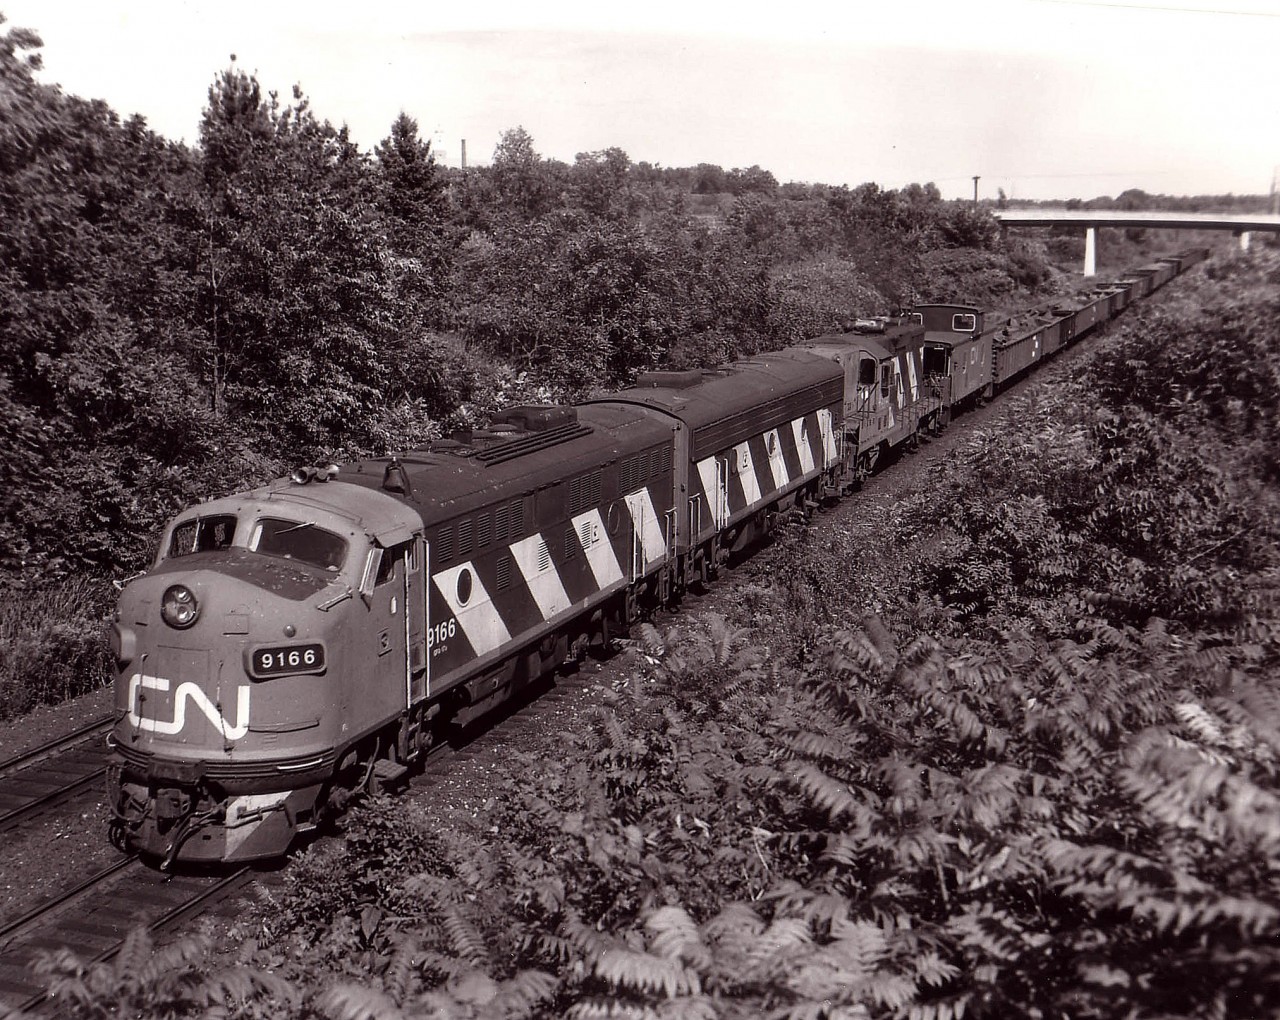 Here's another image of a favourite subject from years gone by, the CN #725 Nanticoke train. Other images in the area of this train are in RP as #'s 6836, 7242 and 7730. The original A-B-A combination fell by the wayside rather quickly as the old warriors developed mechanical problems. One of the "A"s is substituted by GP9 4572 in this edition, with CN 9166 and 9195 ahead. I was a bit annoyed that the train was running on the south track westbound, or 'the wrong track', but still, it was a delight to see. Photo taken from a footbridge to the Royal Botanical Gardens near mile 1 west of Bayview Jct.